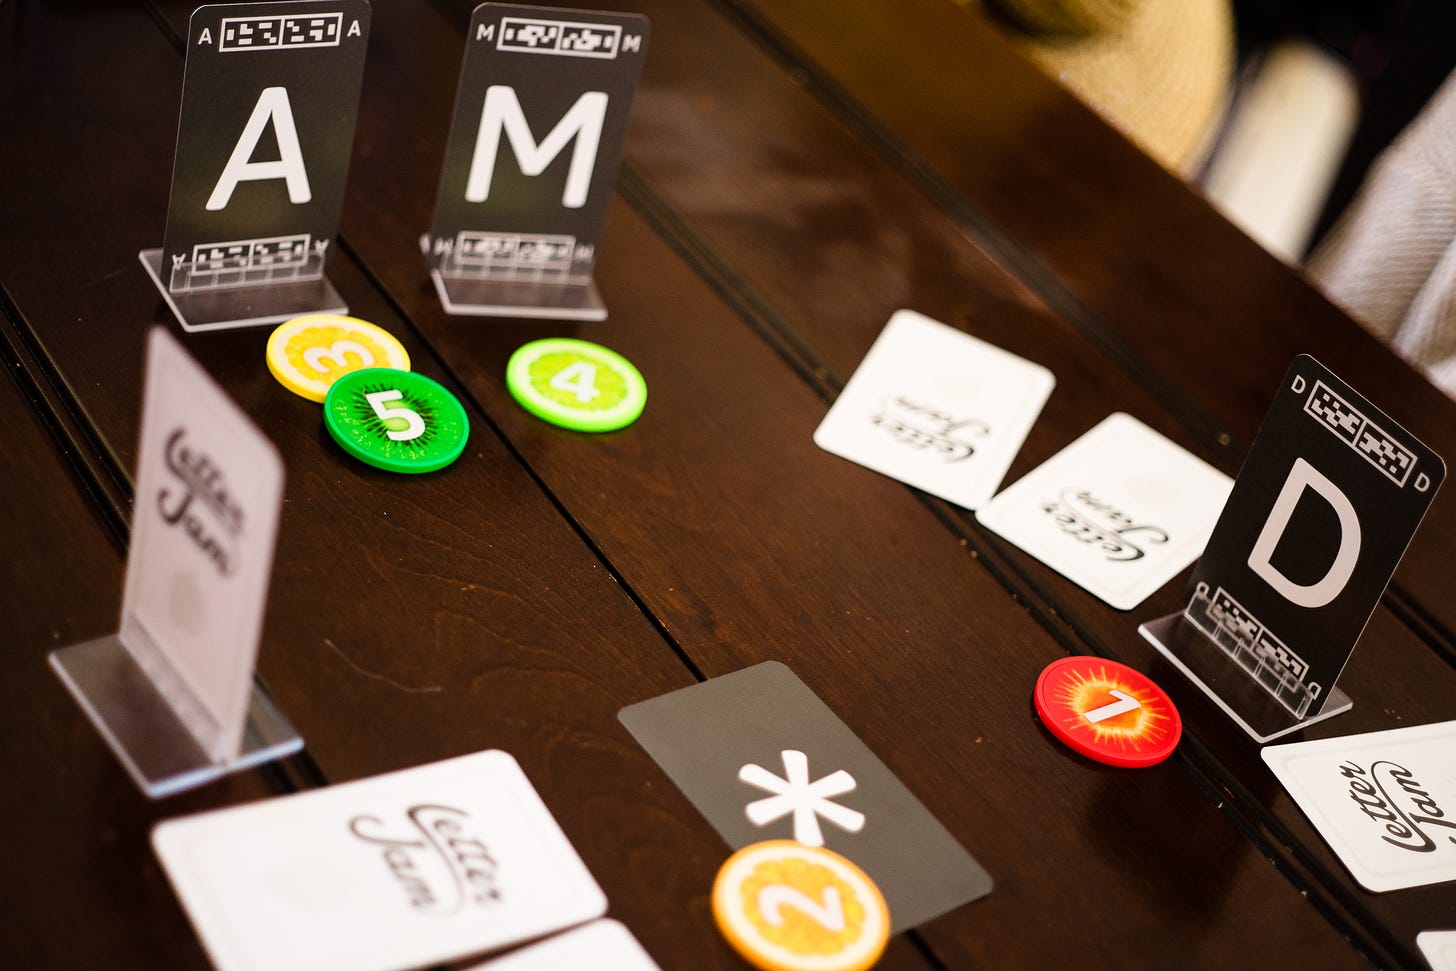 The board game Letter Jam being played at a table. The letters “A”, “M” and “D” are visible.